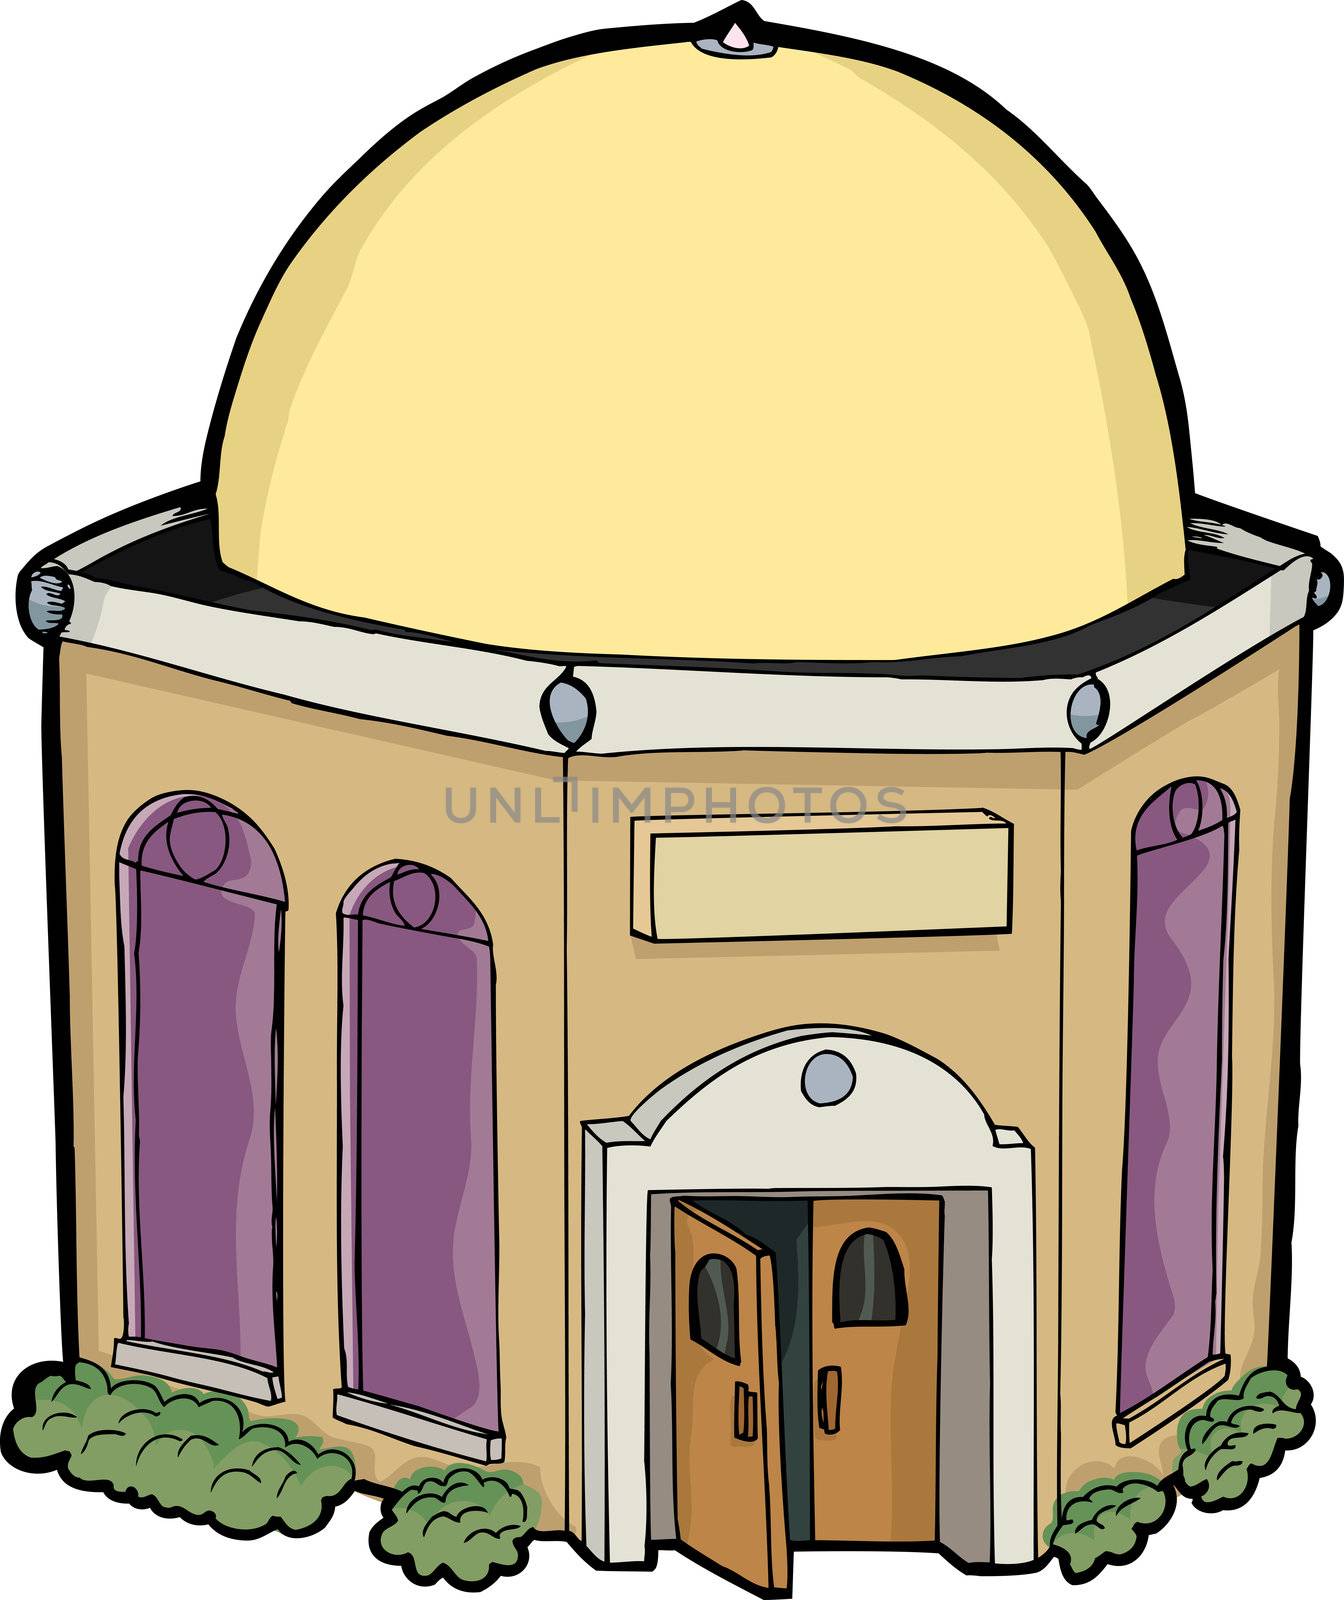 Small generic religious building for any religion